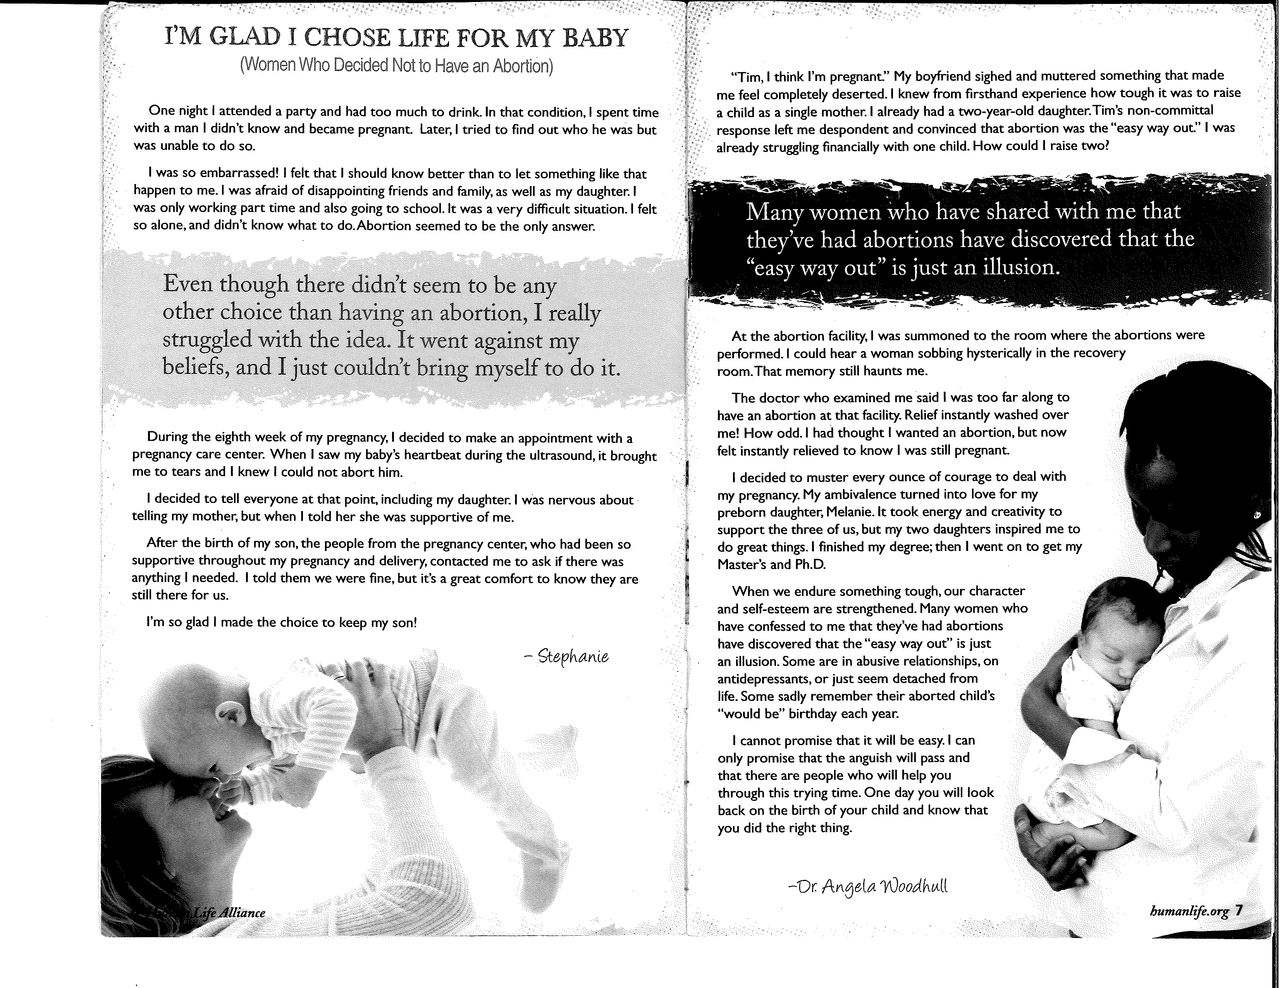 A page from a Human Life (crisis pregnancy center and anti-abortion organization) pamphlet. 